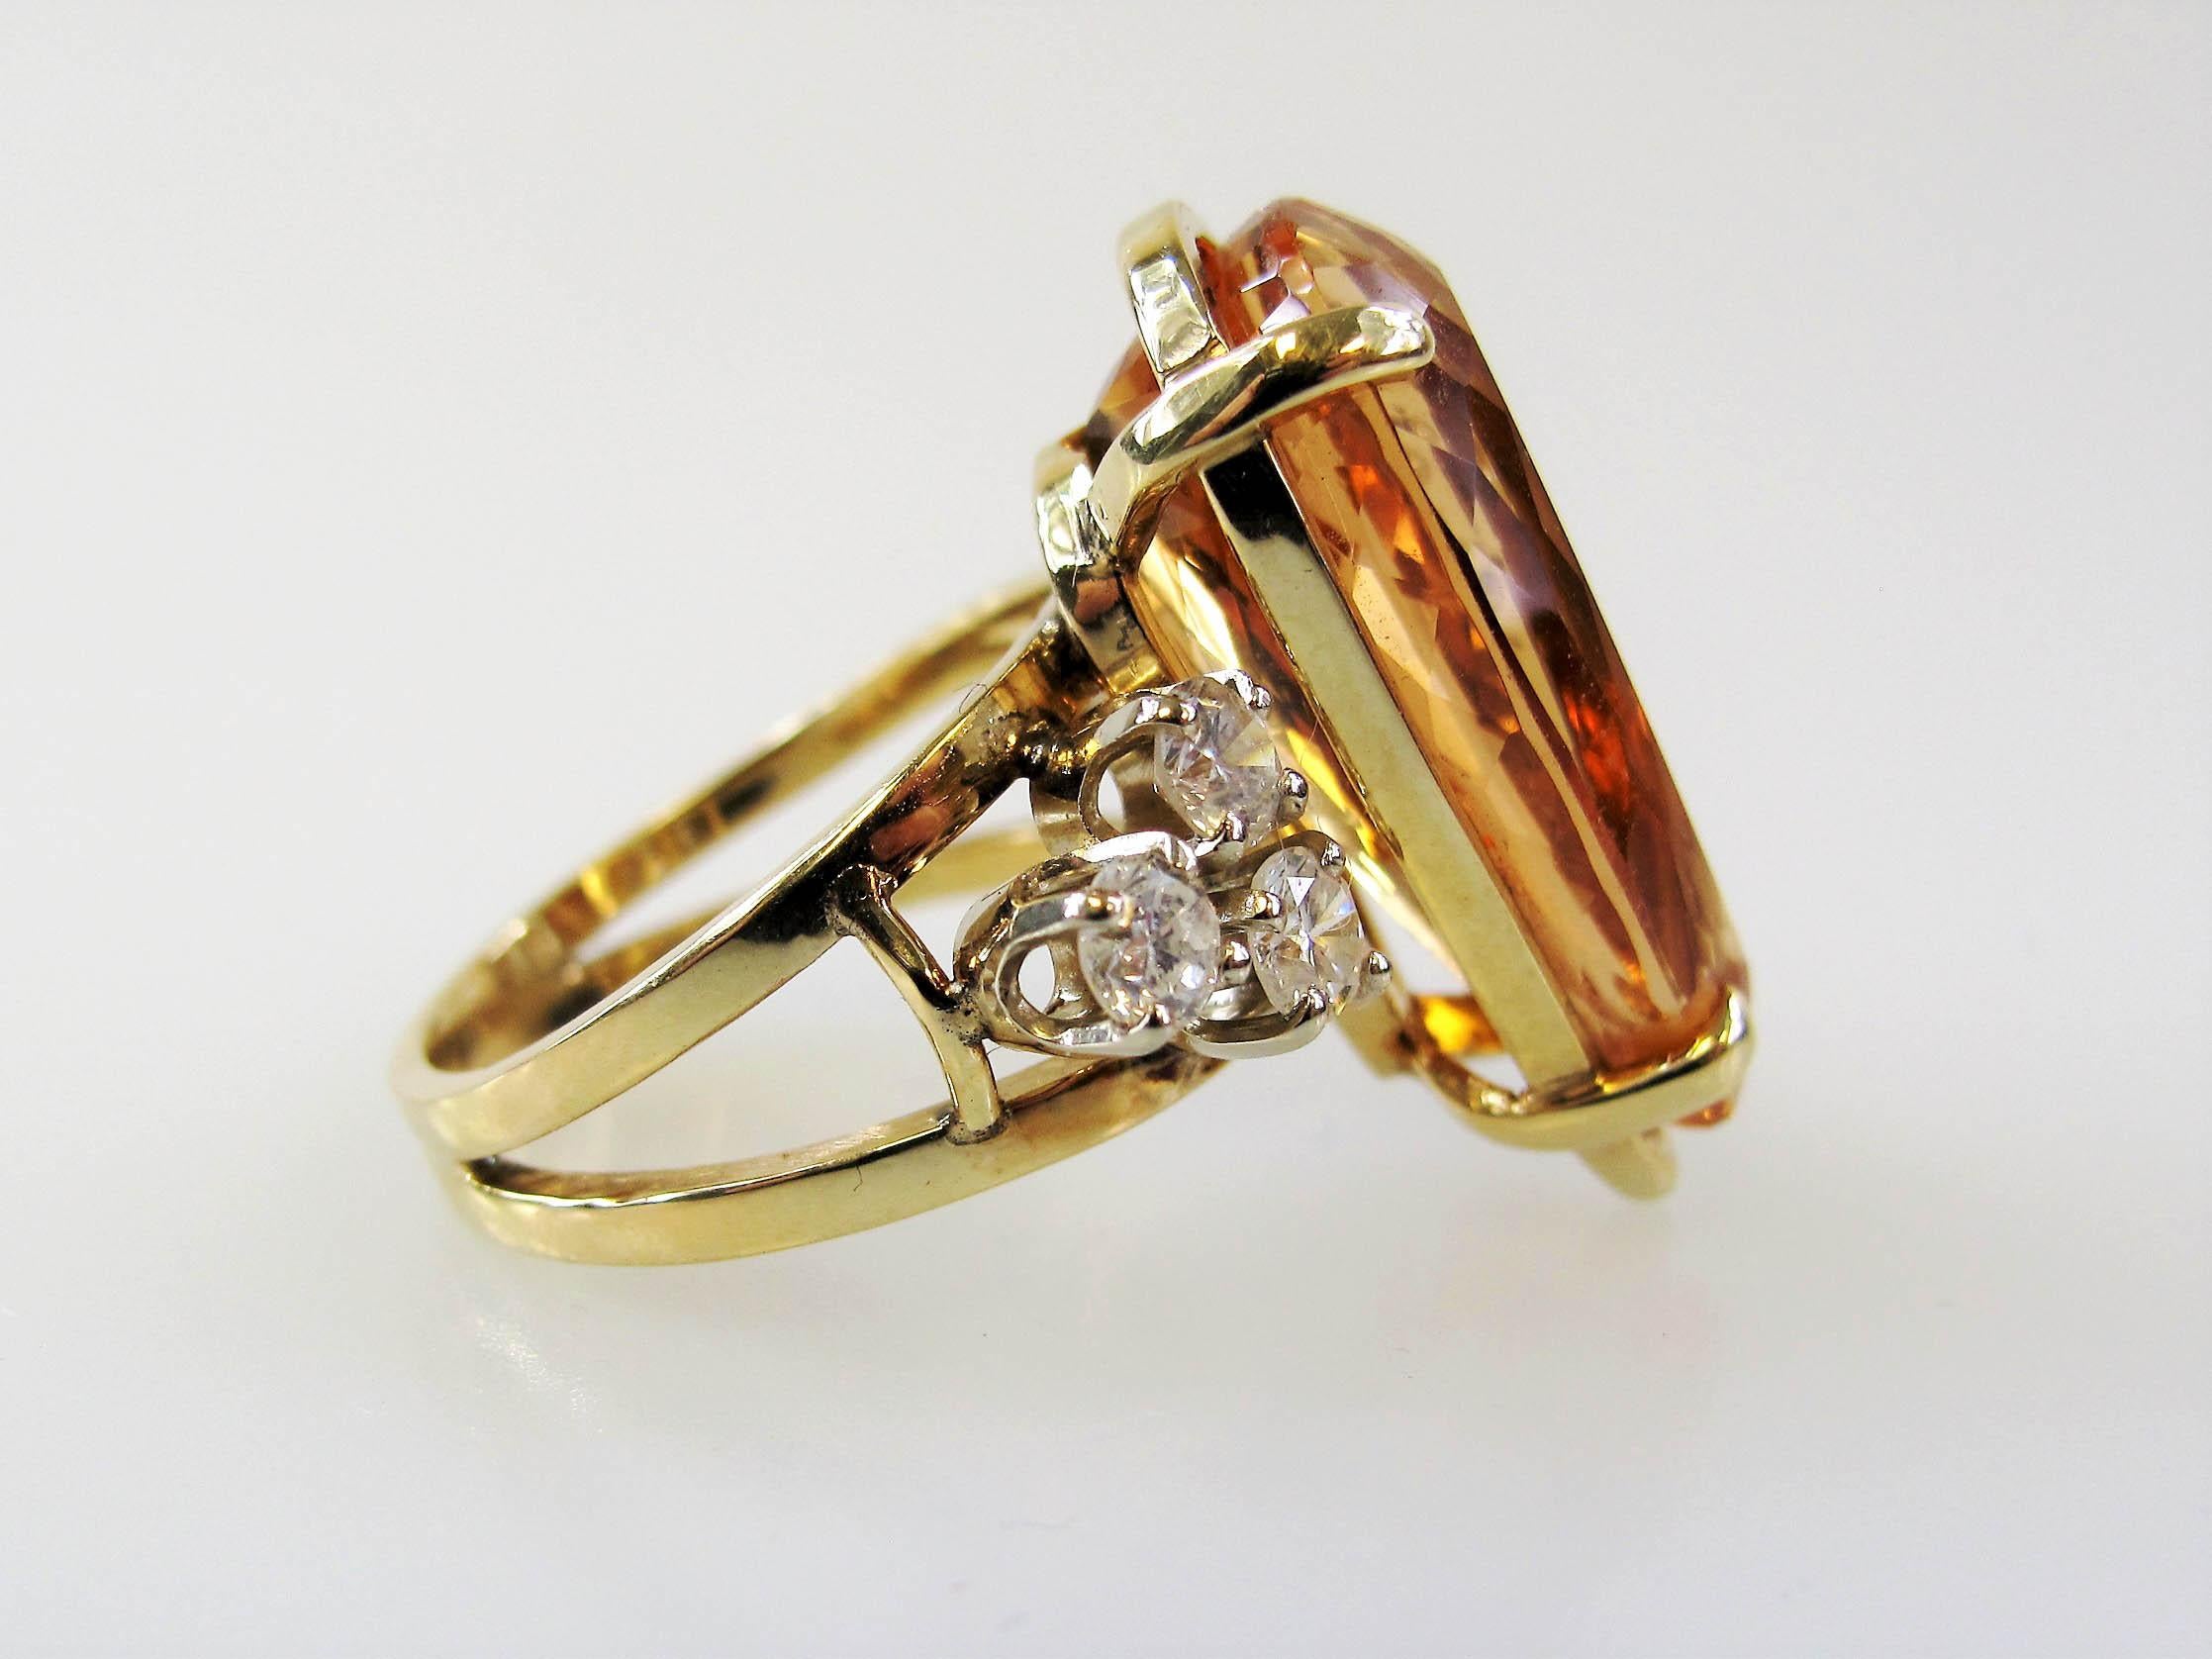 Ring size 8.75

This exquisite imperial topaz and diamond ring is an absolute showstopper. Featuring an eye-catching pear mixed cut topaz stone, as well as shimmering diamond accents, this stunner of a ring makes a bold statement with both its